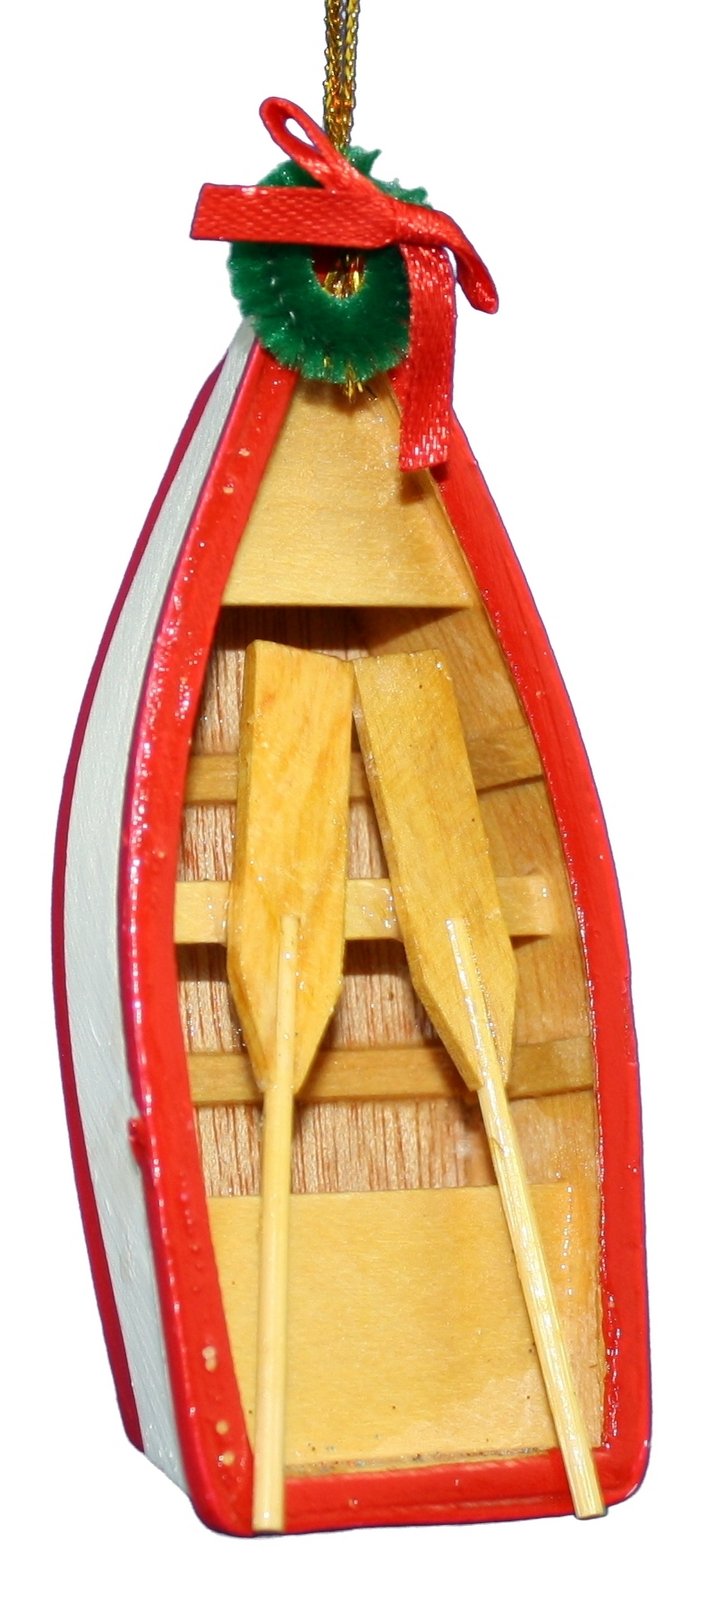 Wooden Row Boat Ornament - Green - The Country Christmas Loft